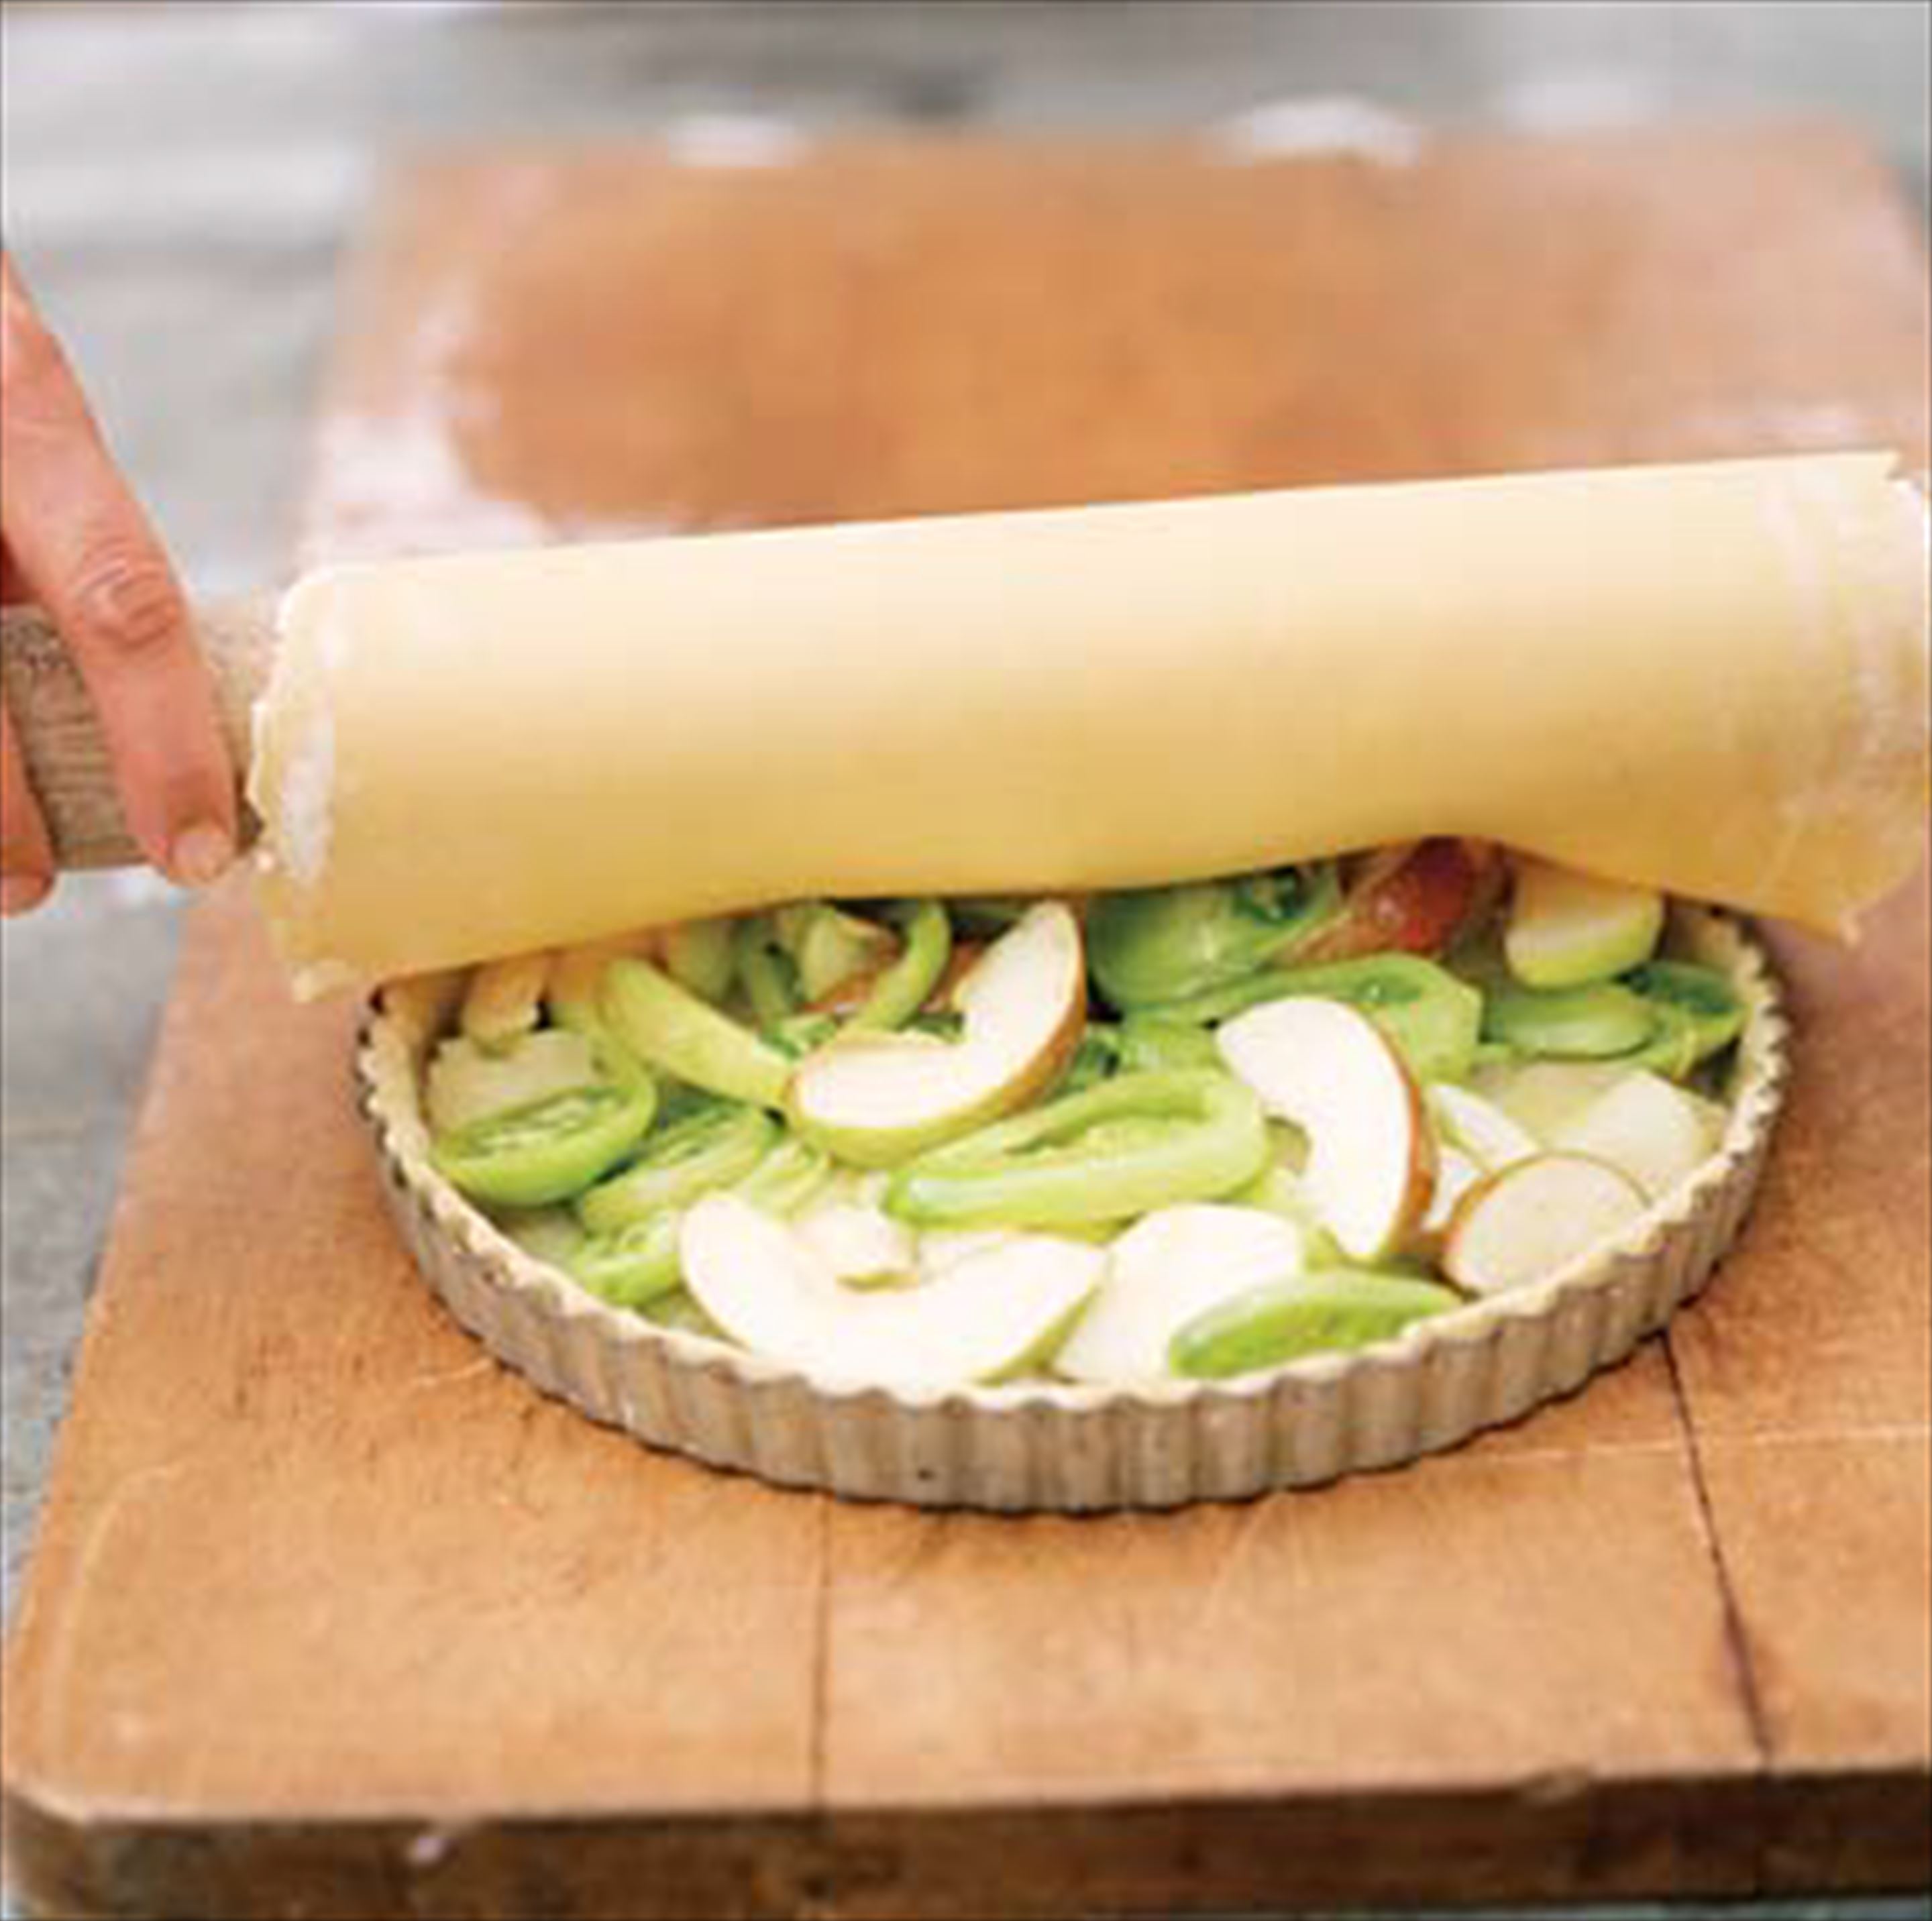 Apple and green tomato pie